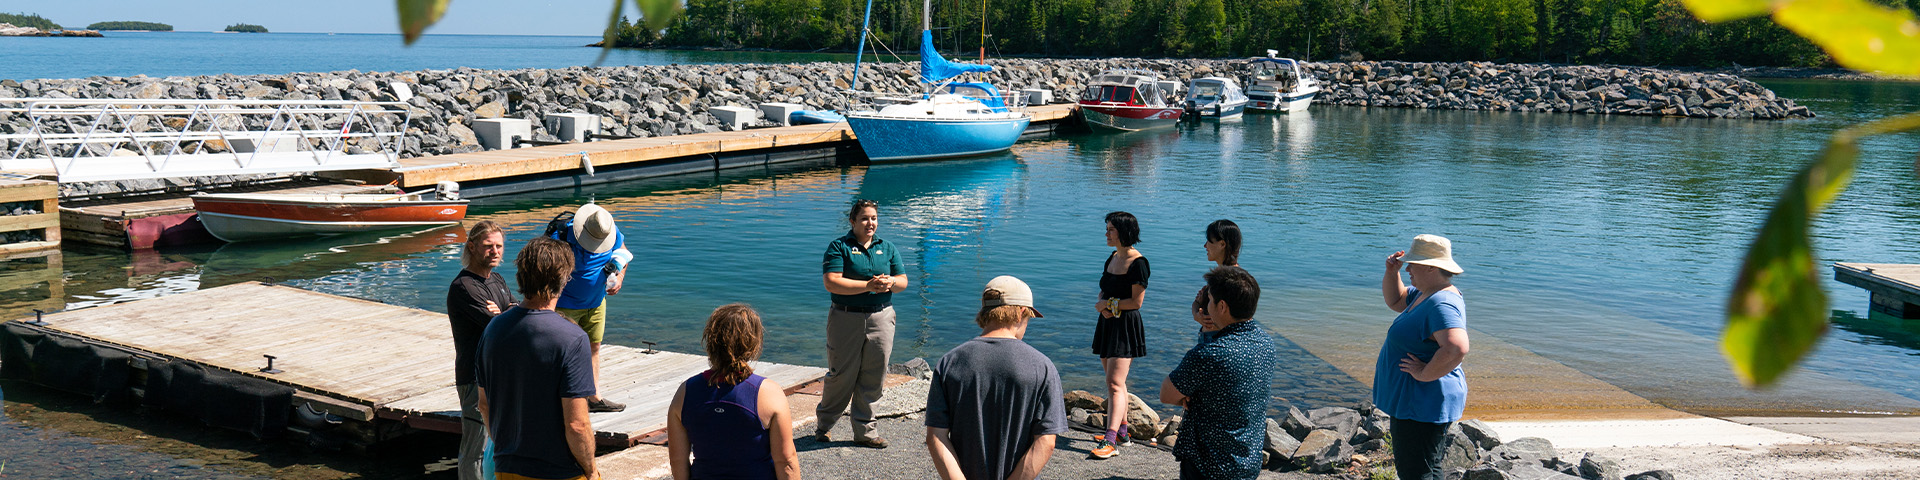 A group listening to a presentation in a marina.